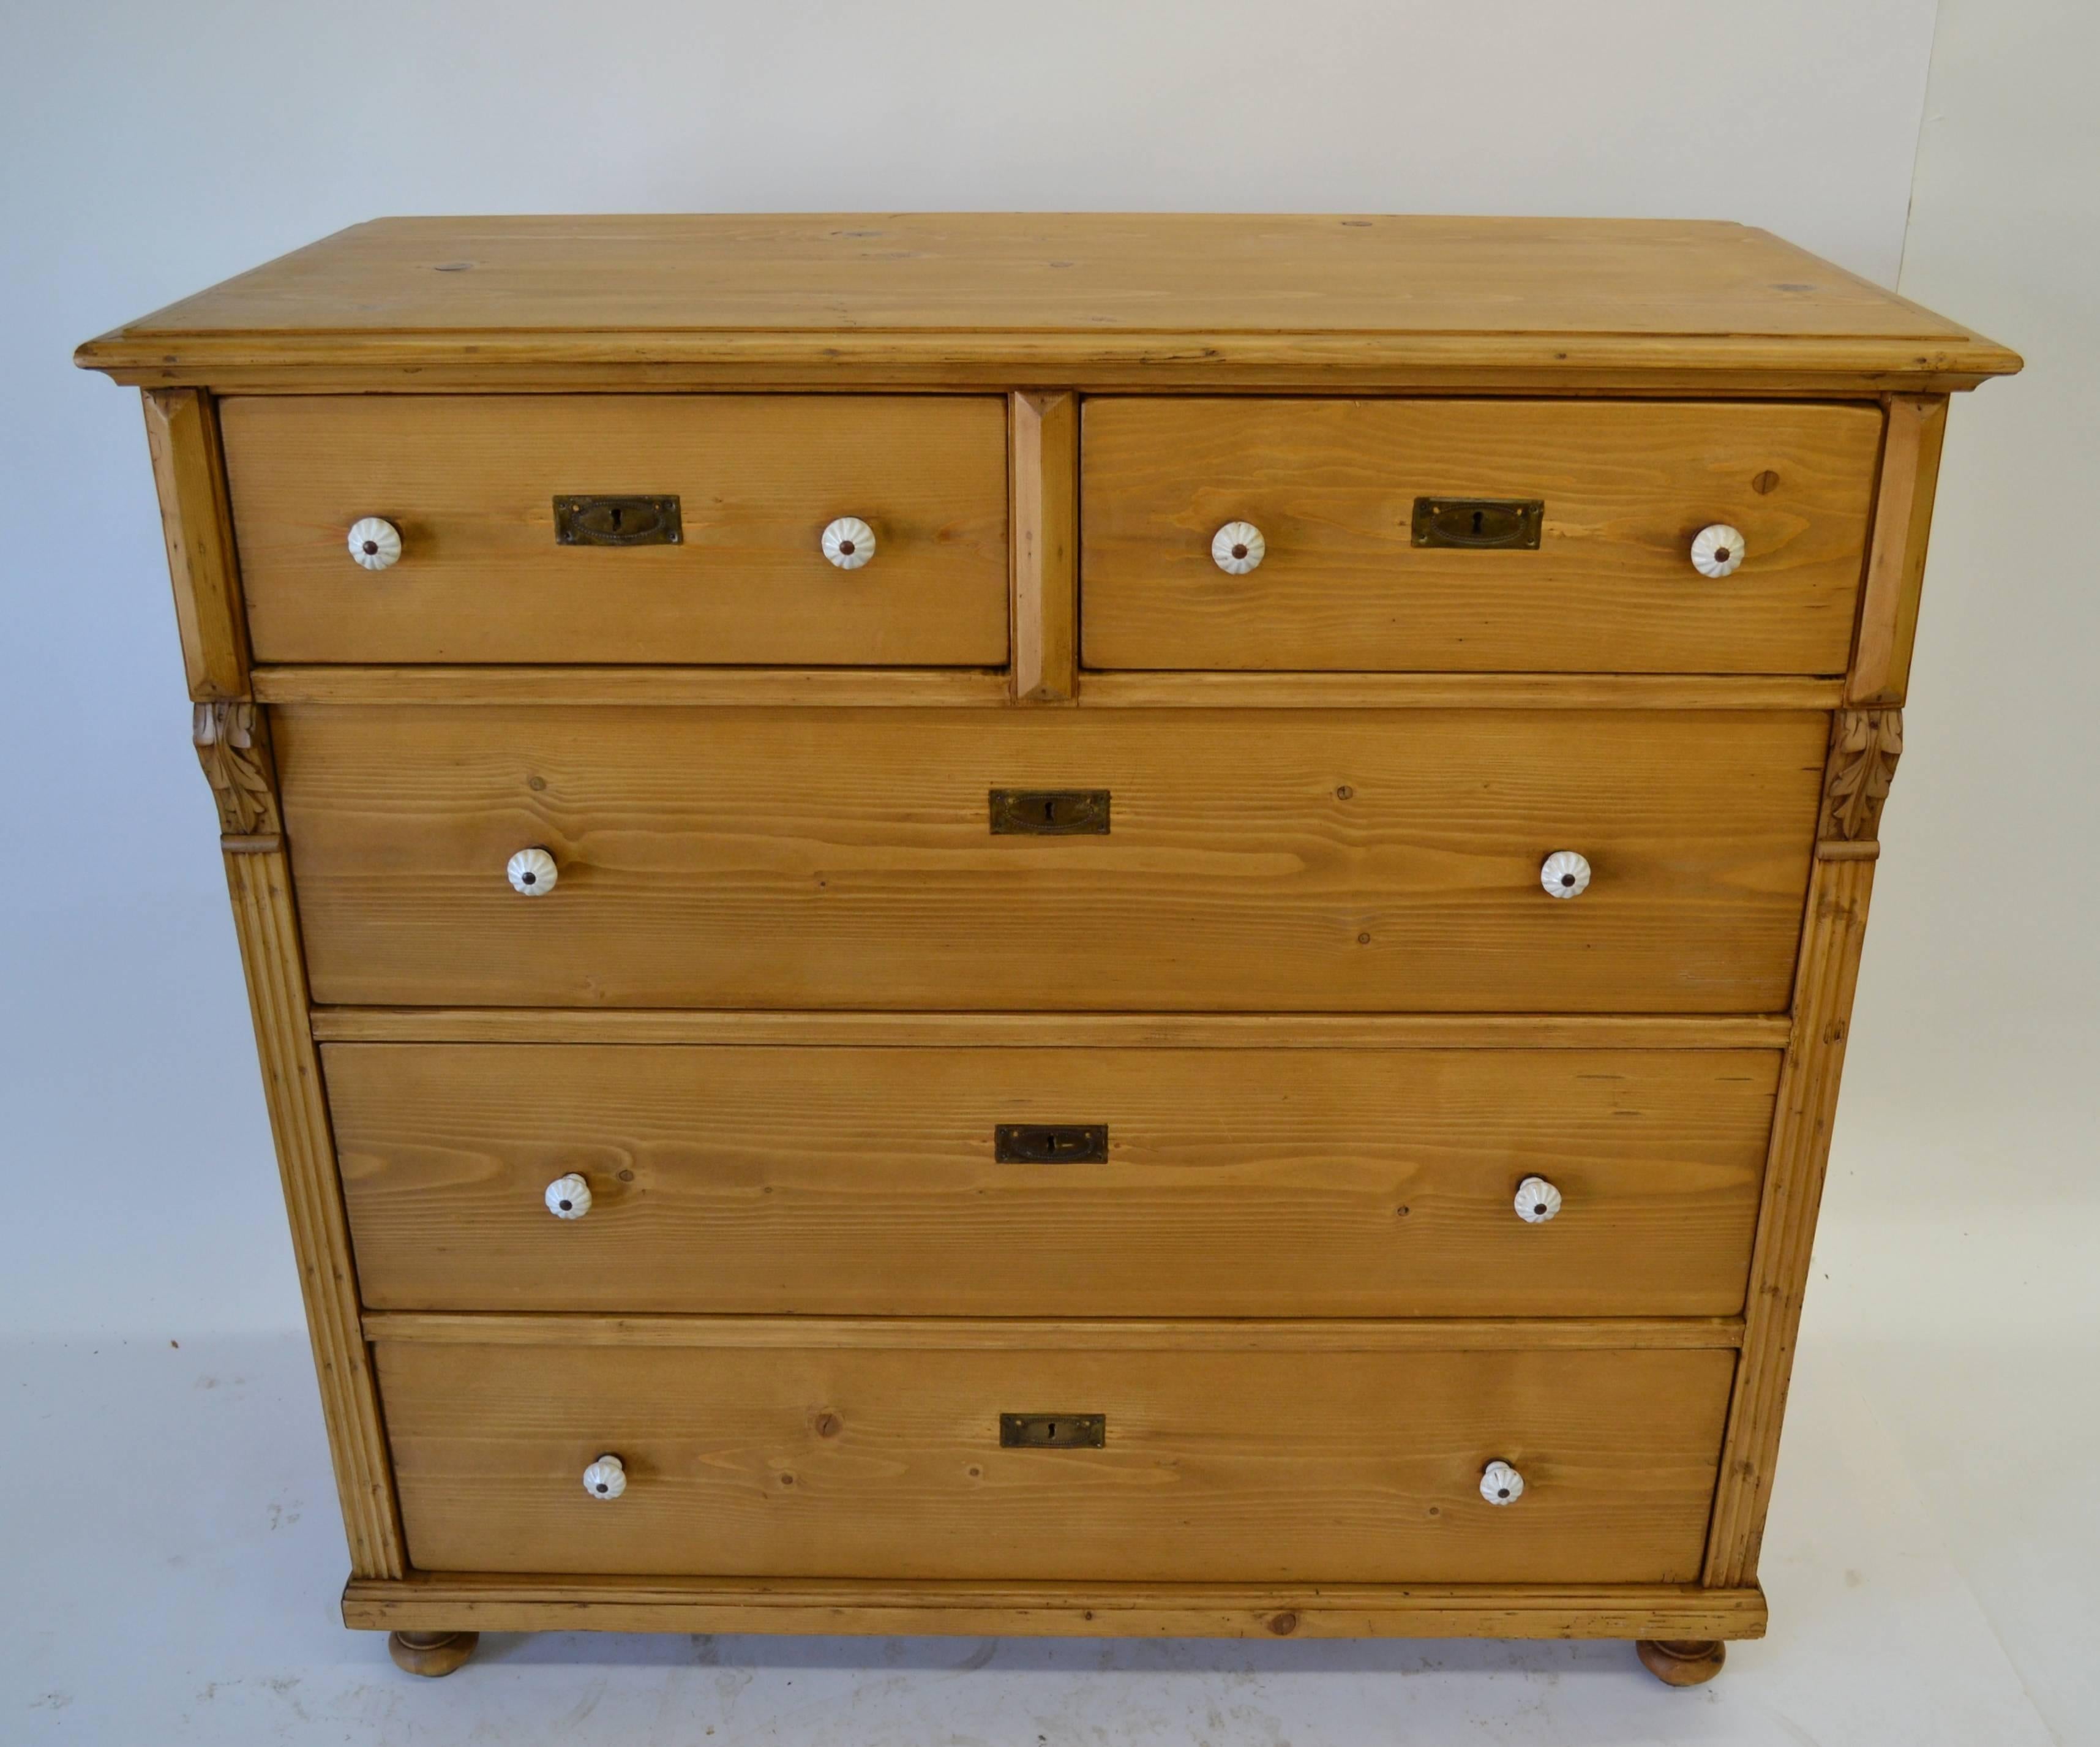 Polished Pine Chest of Drawers